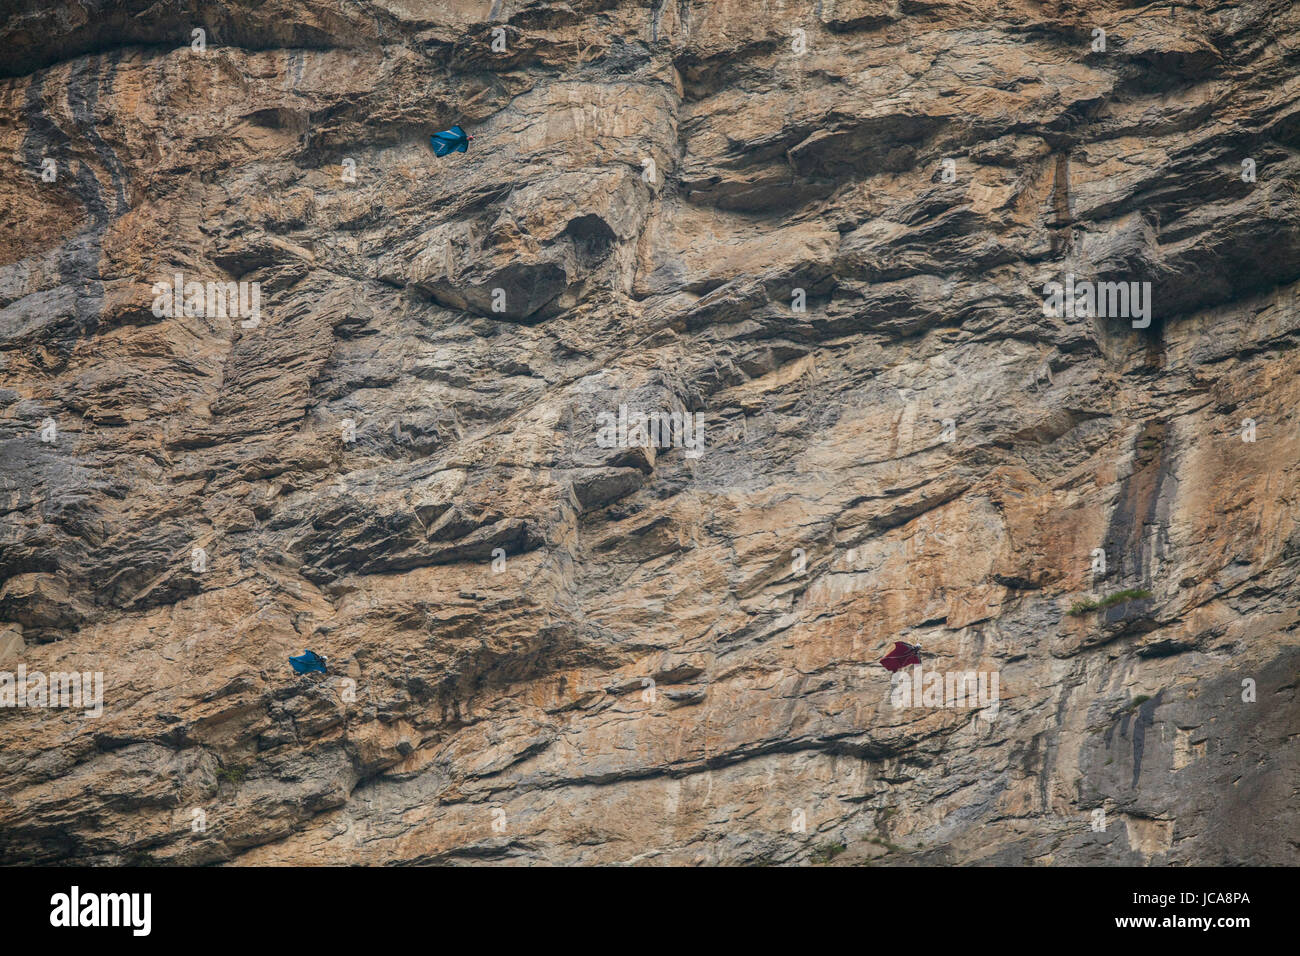 Three base jumpers in flight with a huge rock wall backdrop.  Toggenburg, Switzerland. Stock Photo